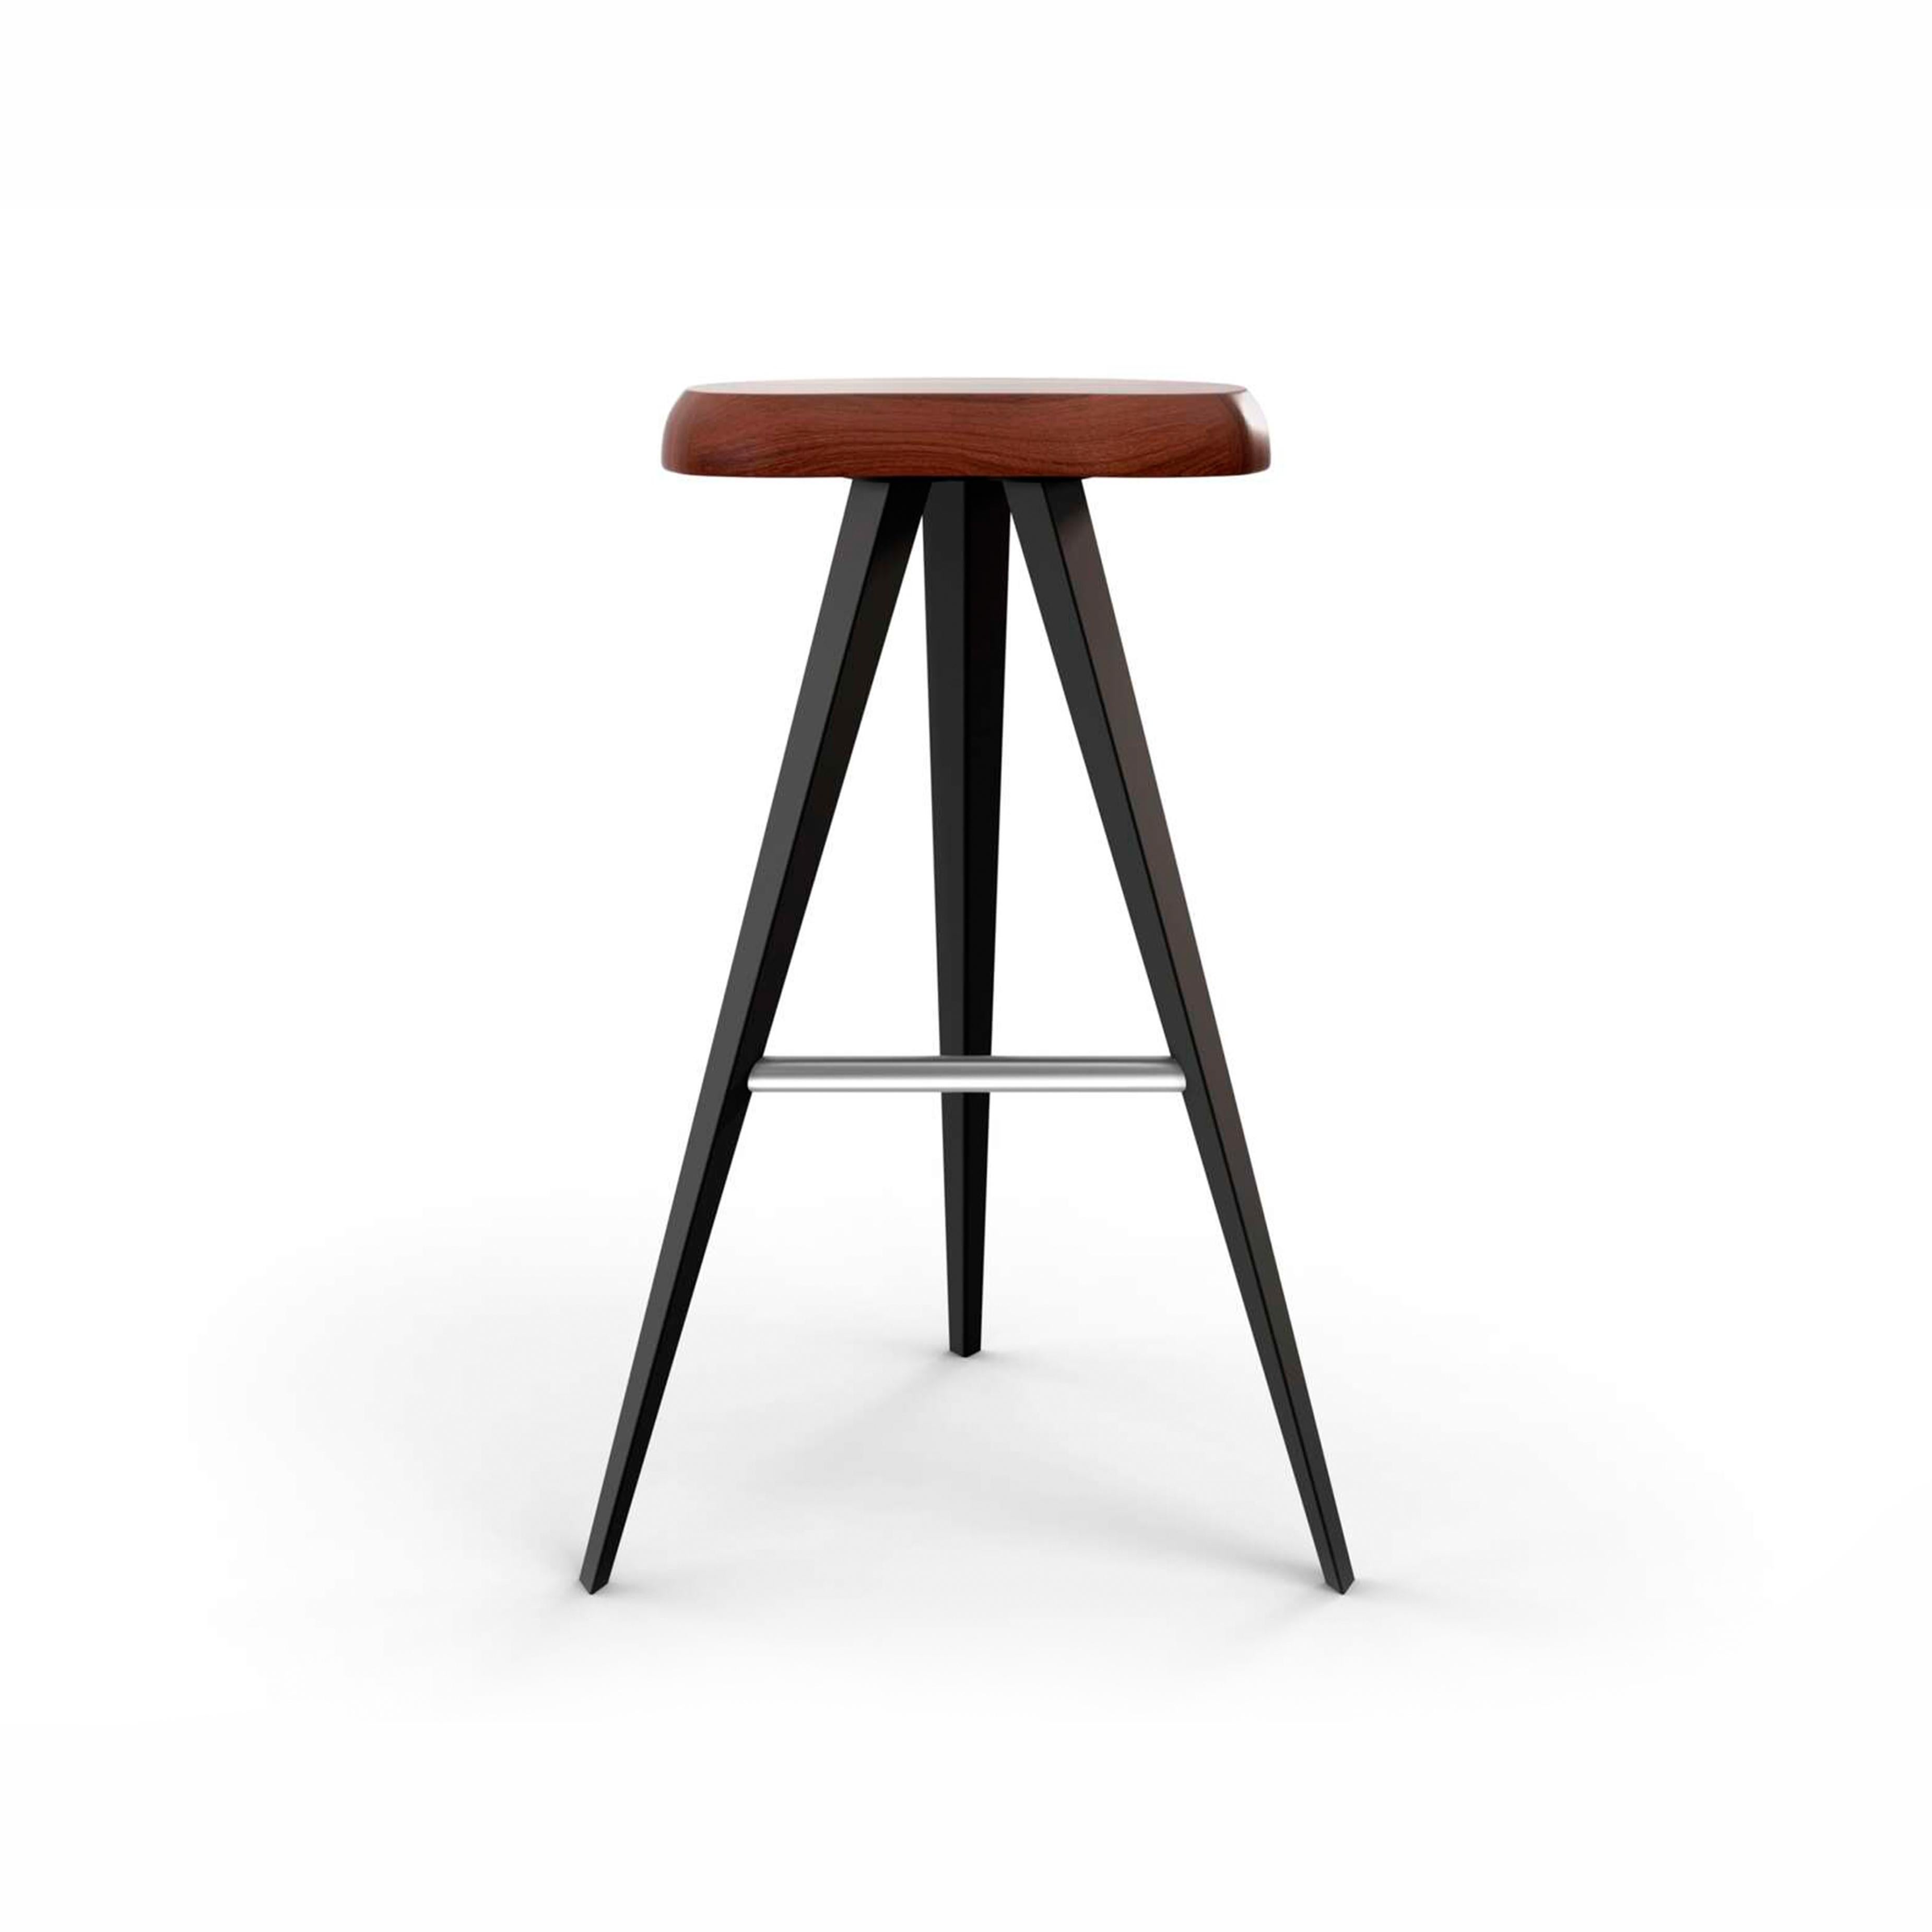 This stool in the Mexique family, measures 72 cm high. The free-form chair, in solid wood, is set off beautifully by the lightness of the geometric structure of the metal legs with matte black or glossy gunmetal painted finish.

This designer stool